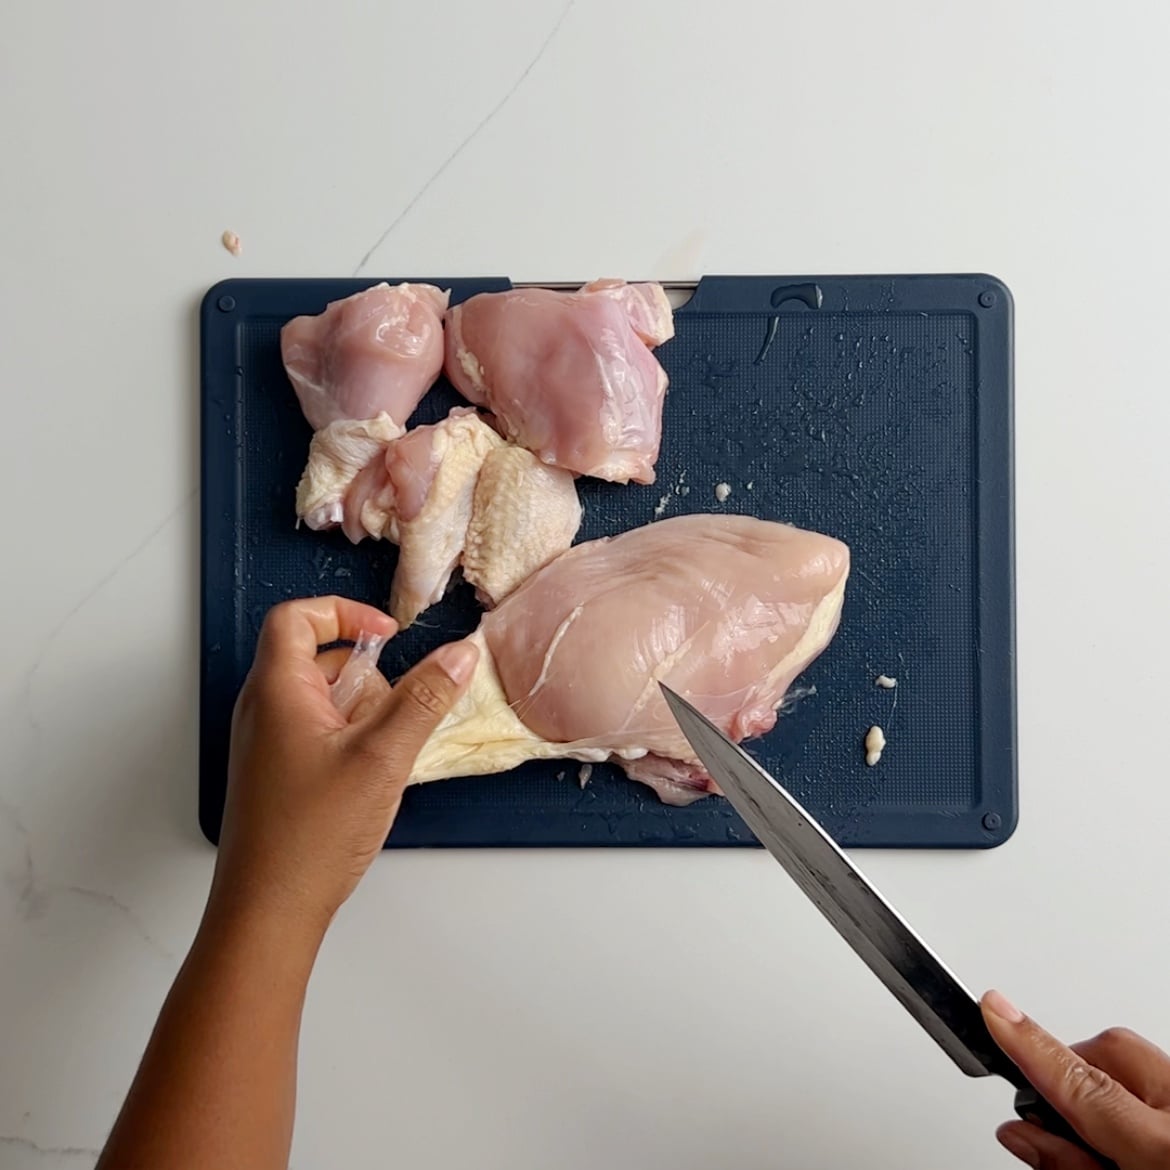 Removing the skin from chicken breasts